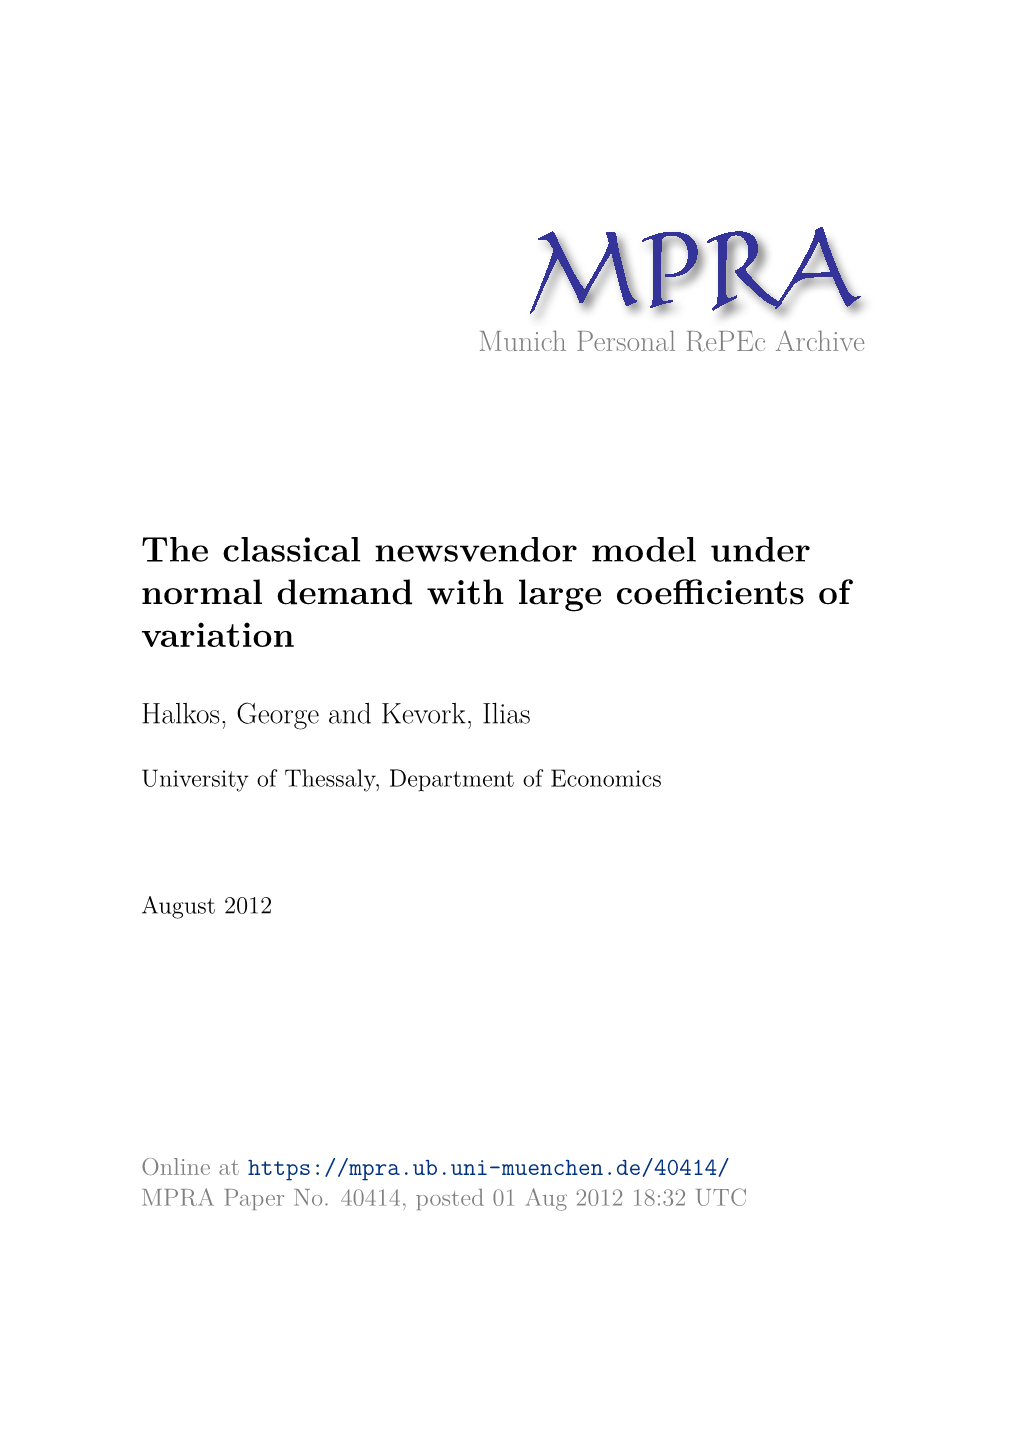 The Classical Newsvendor Model Under Normal Demand with Large Coeﬃcients of Variation